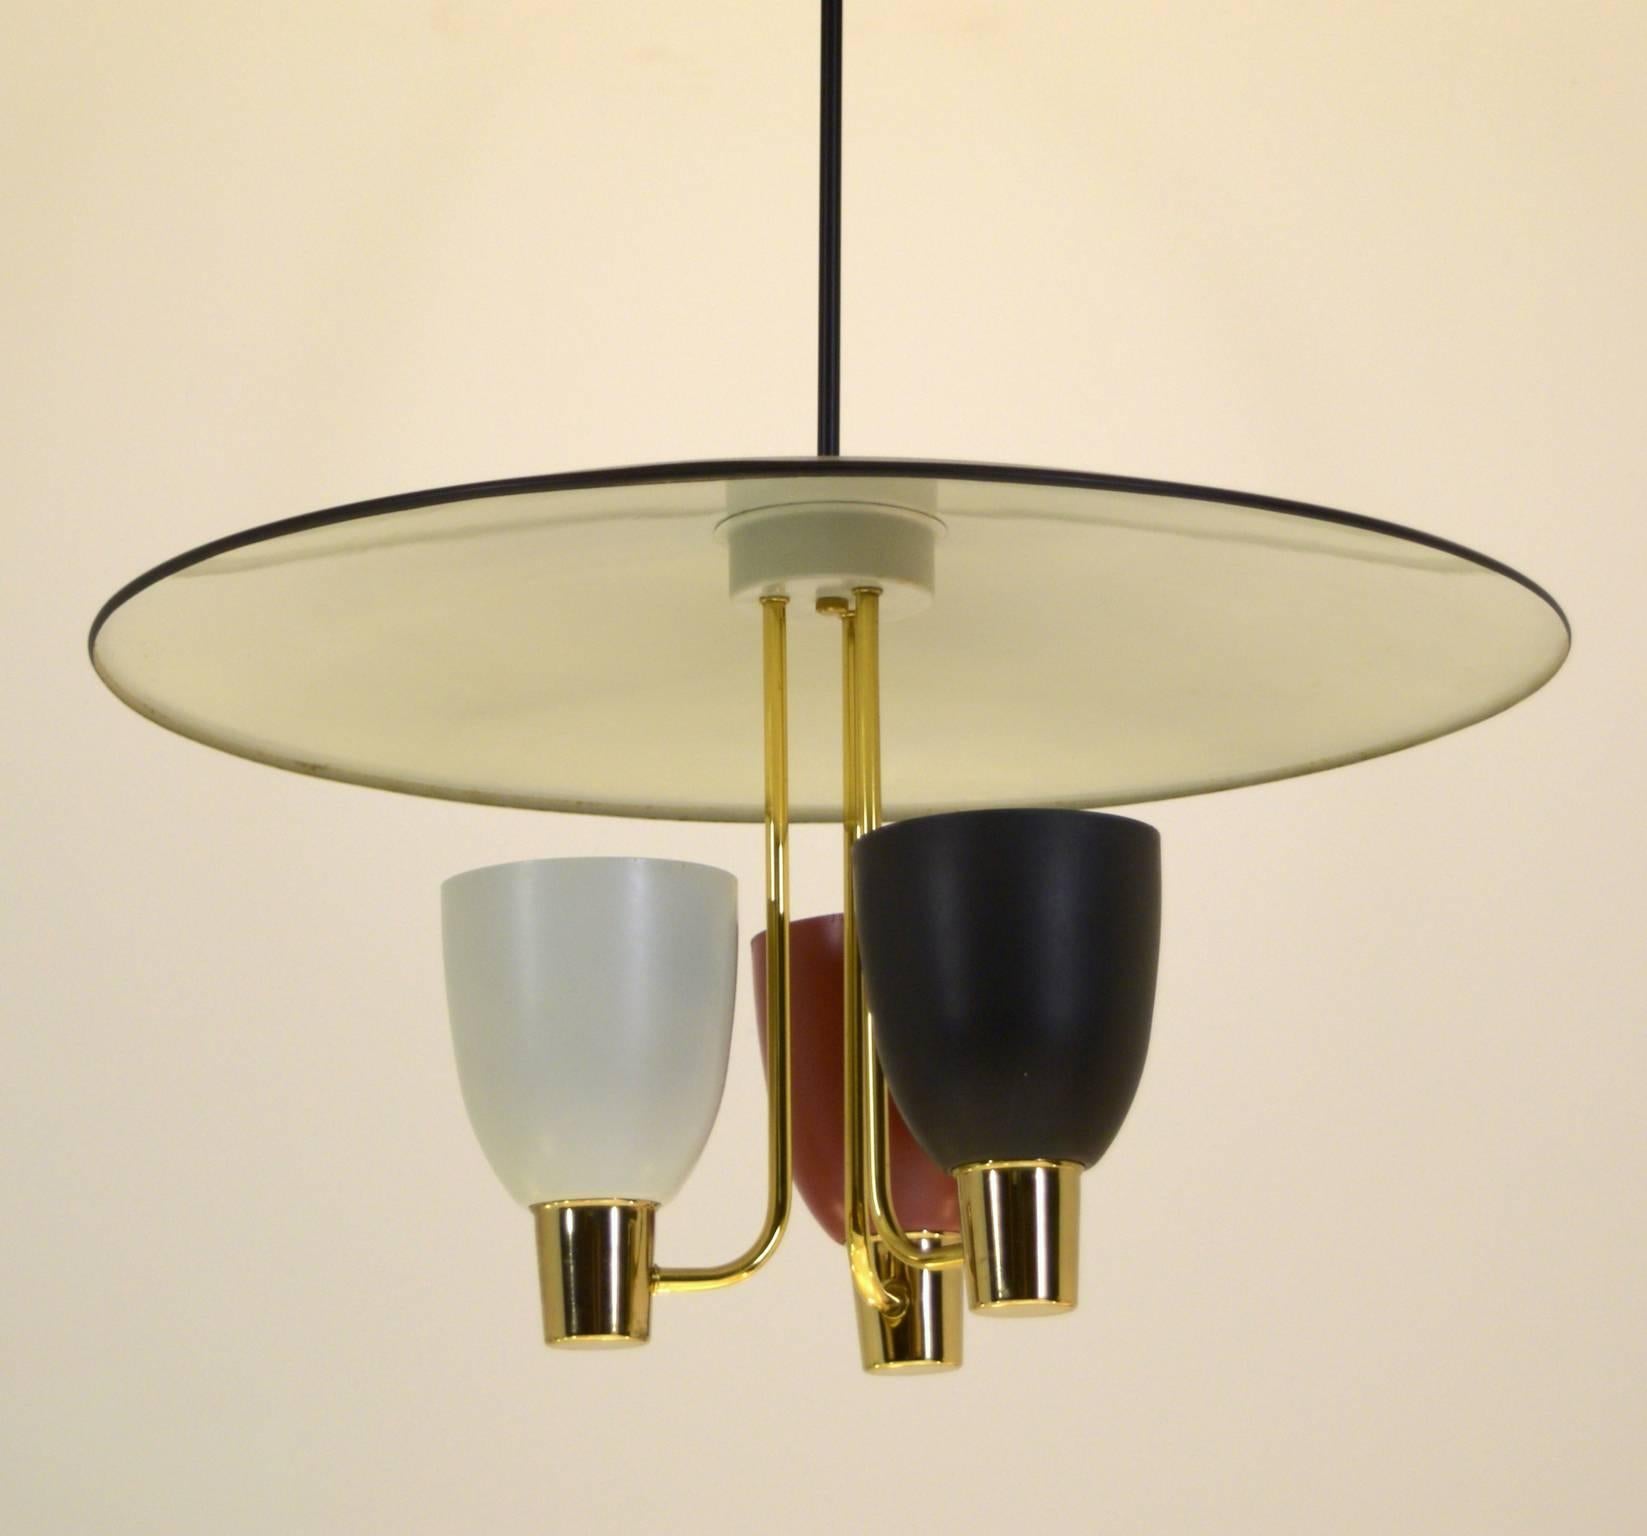 Large Original 1953 Pendant Chandelier by Moe Lighting with 3 arms for dining  3